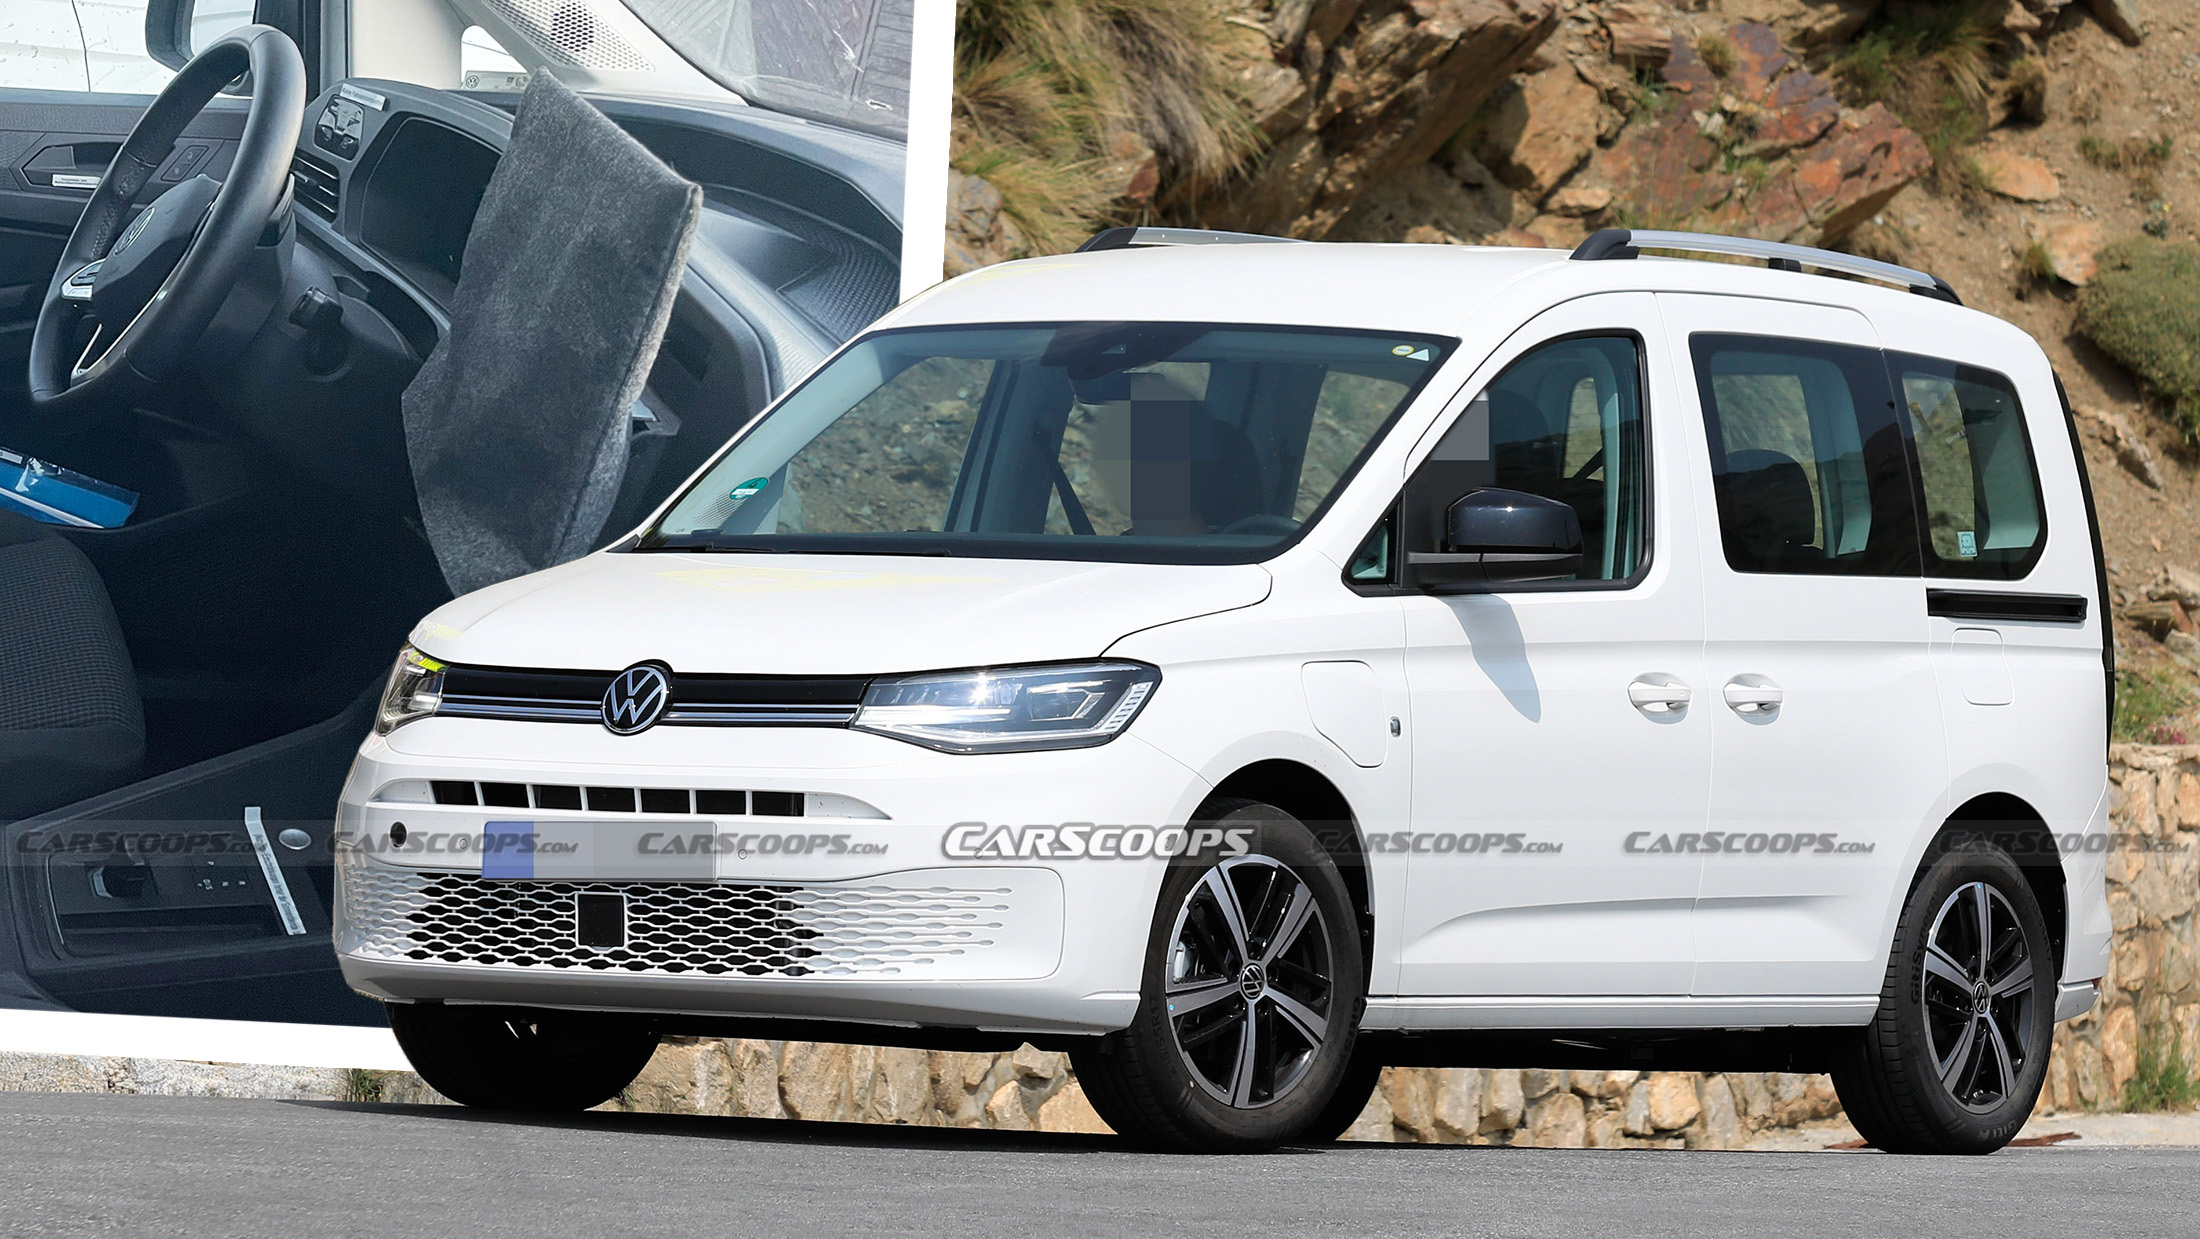 VW Caddy eHybrid Shows It All, Including Massive Infotainment Screen